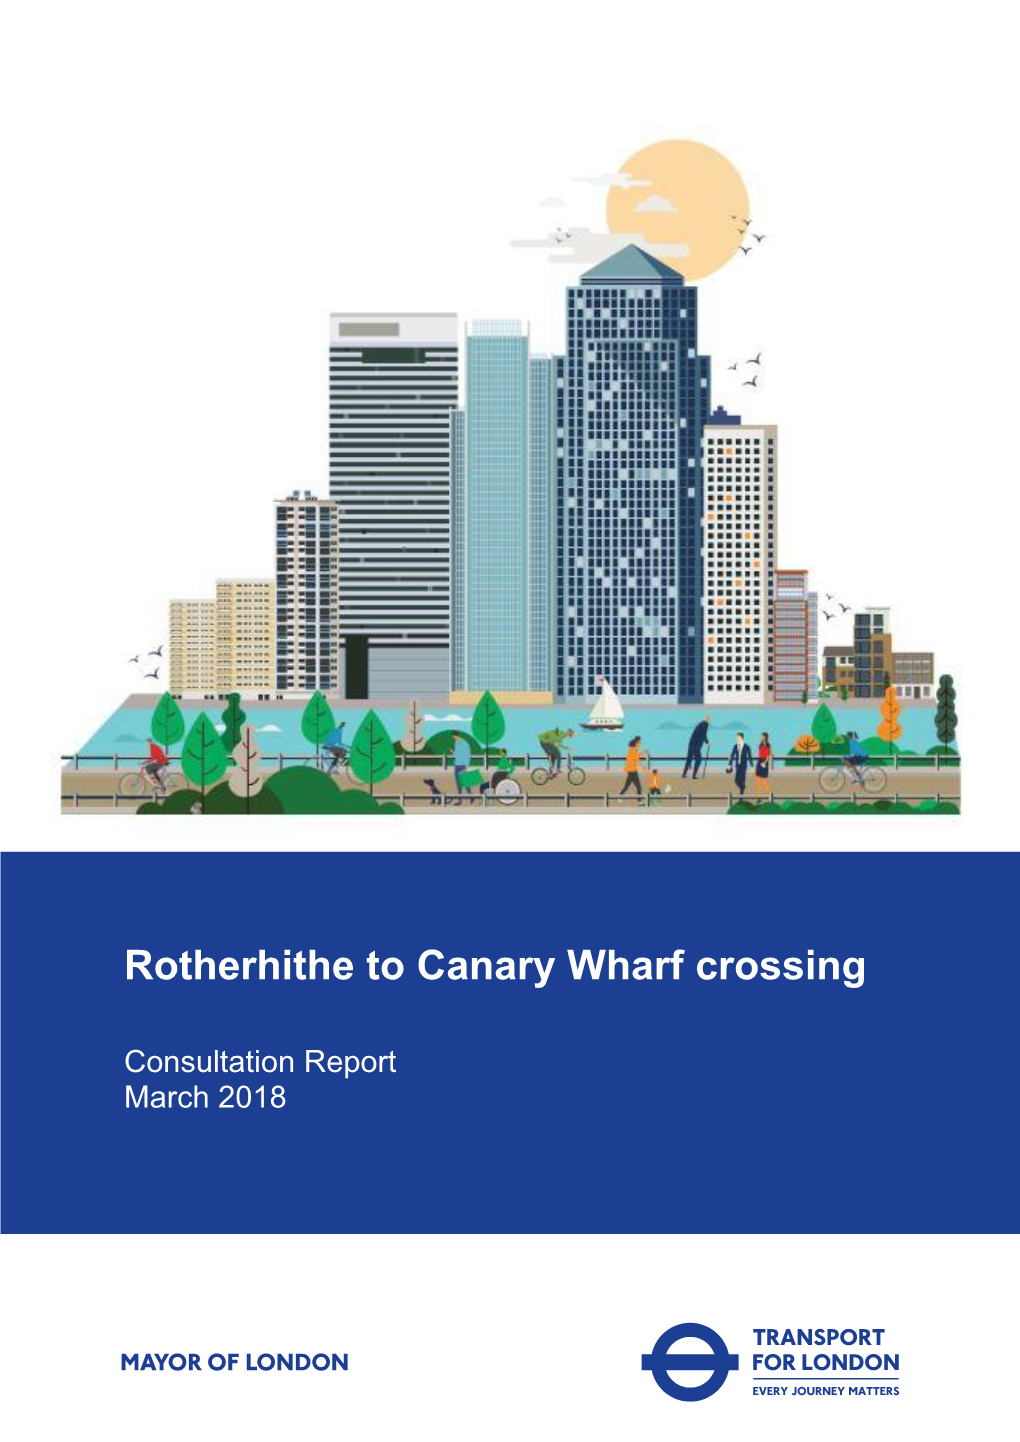 Rotherhithe to Canary Wharf Crossing